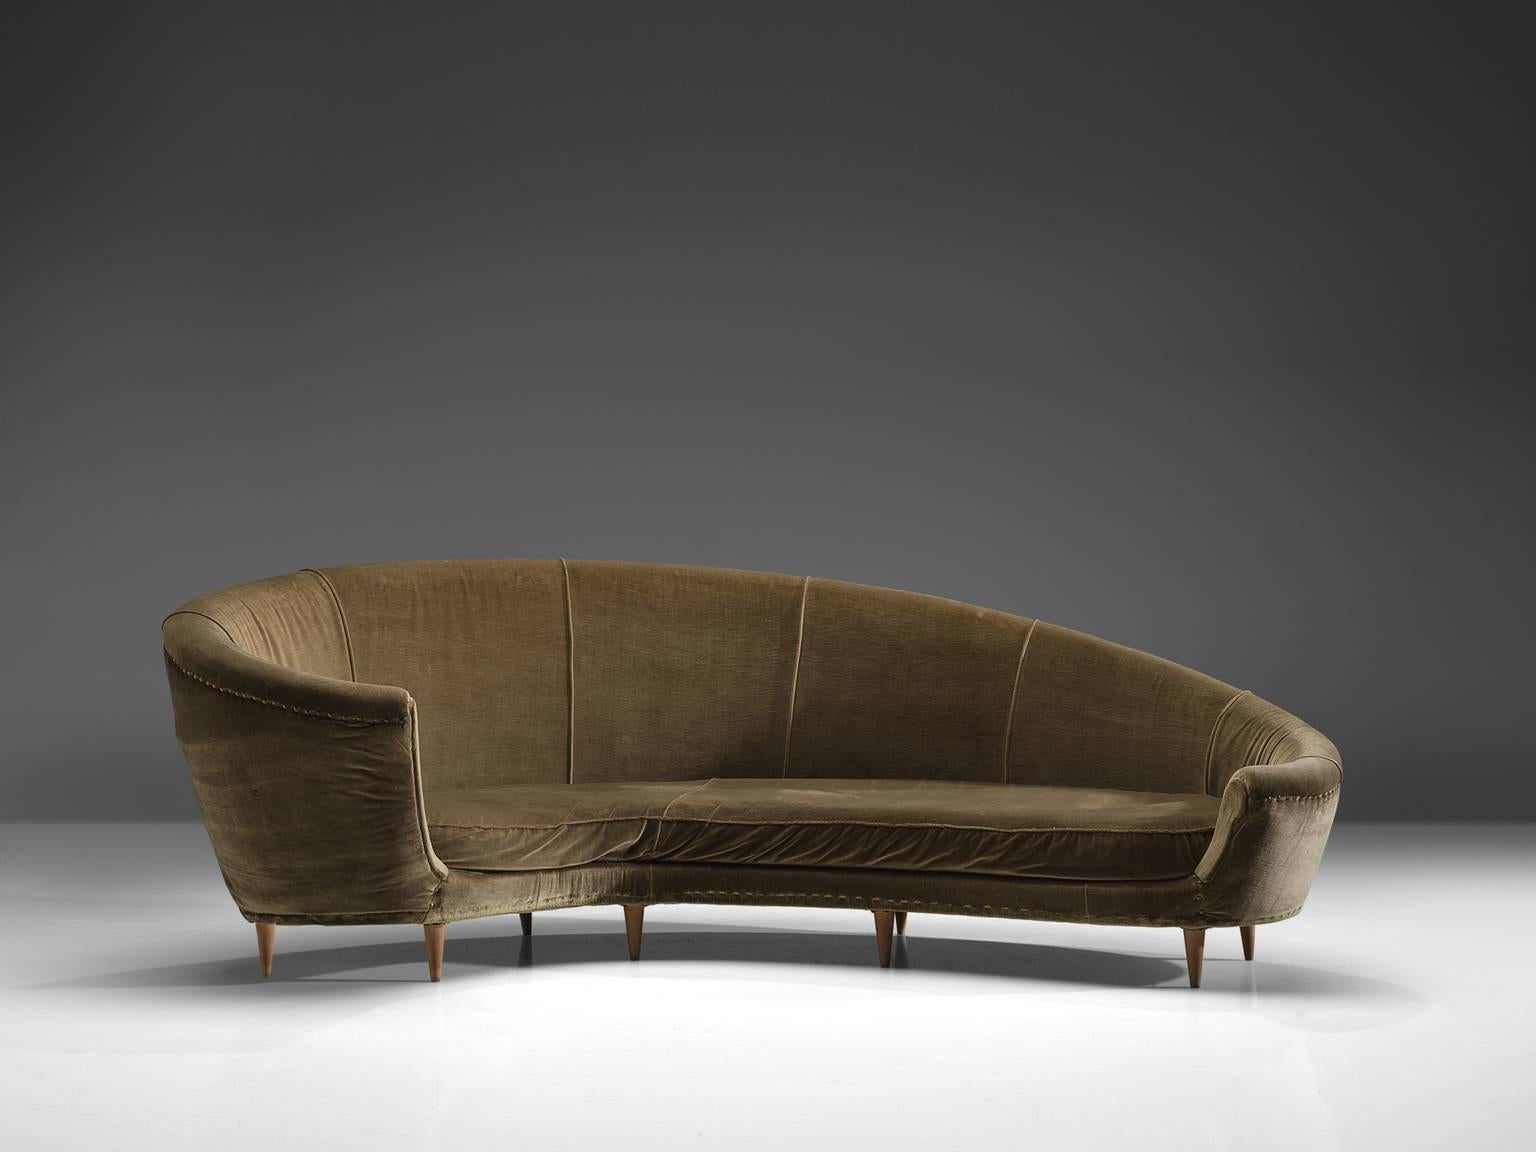 Settee, green velvet fabric, wood, Italy, 1950s

This dynamic sofa features an a-symmetrical back that is higher on the left side and slowly slopes towards much lower end on the right side. The six tapered delicate legs are executed in blond wood